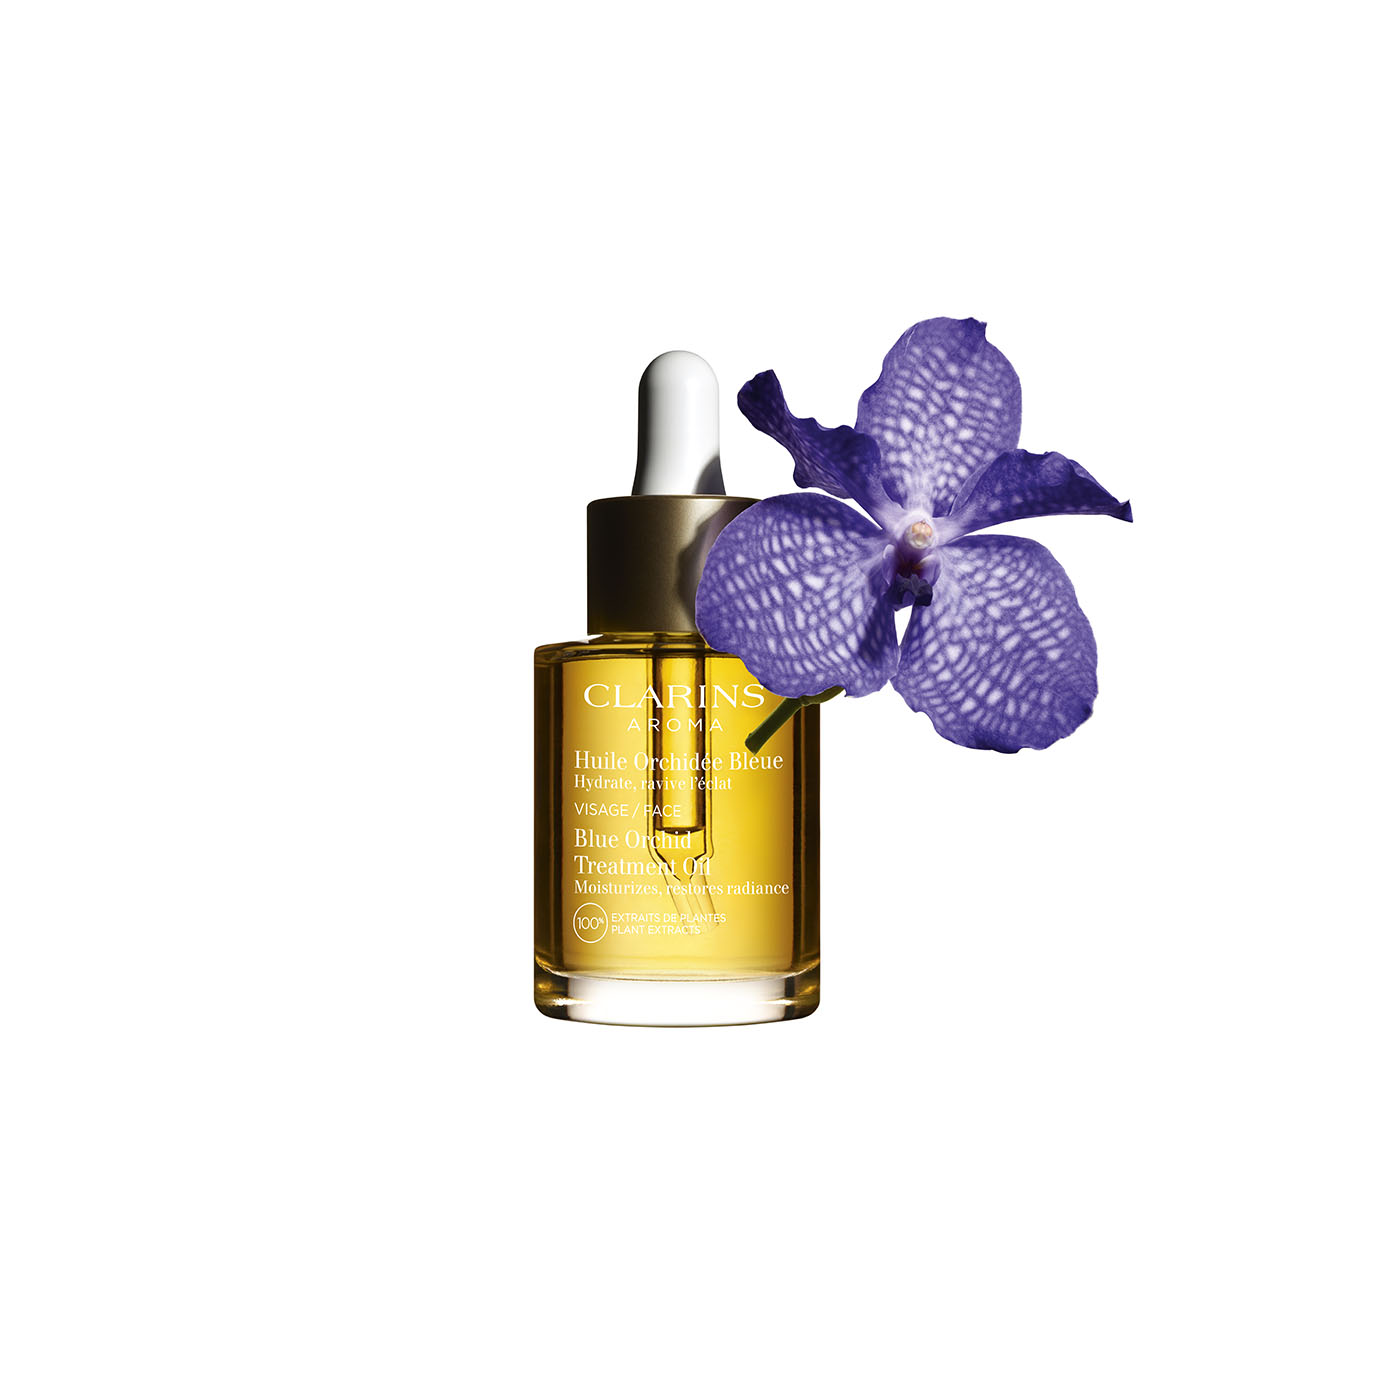 Blue Orchid Face Treatment Oil - Face Rebalancing Oil by Clarins | CLARINS®